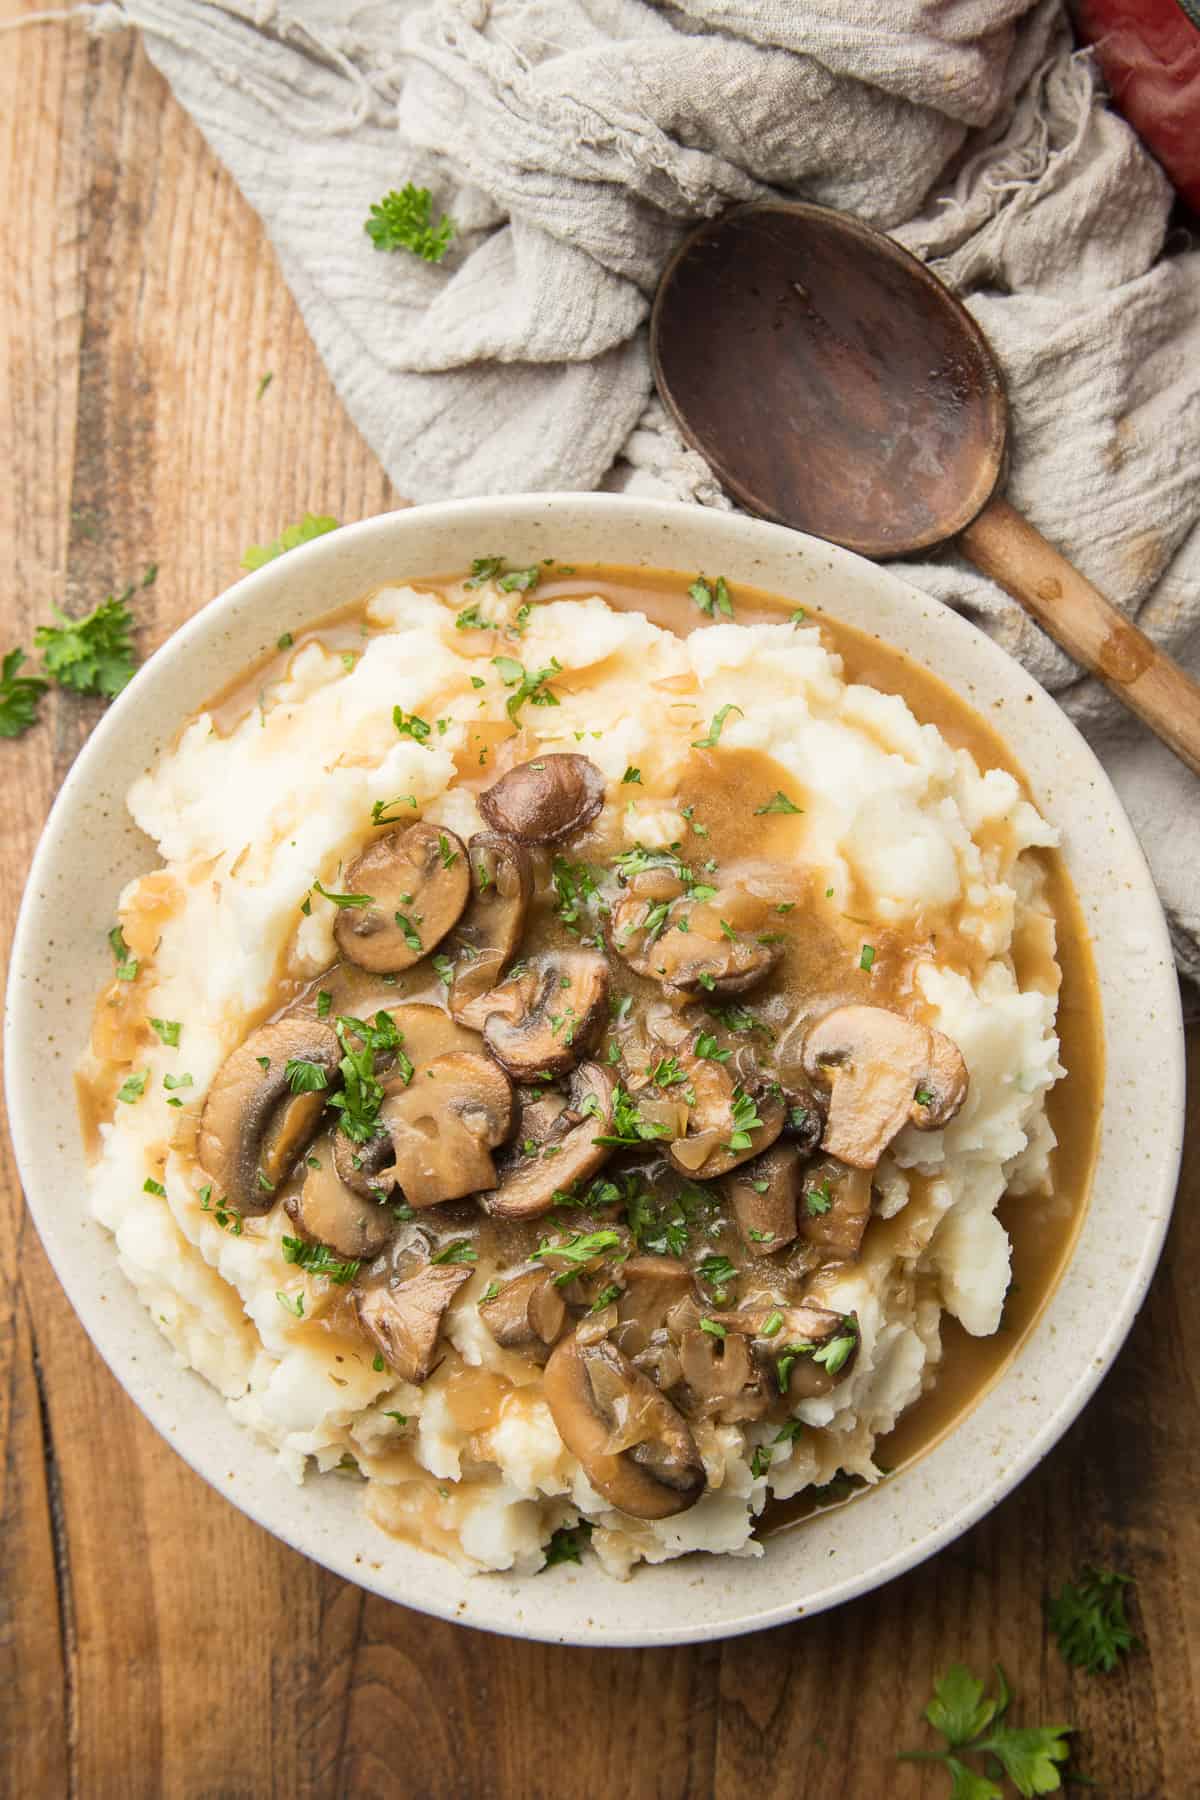 Bowl of Mashed Potaotes and Vegan Mushroom Gravy on a wooden table with wooden spoon on the side.